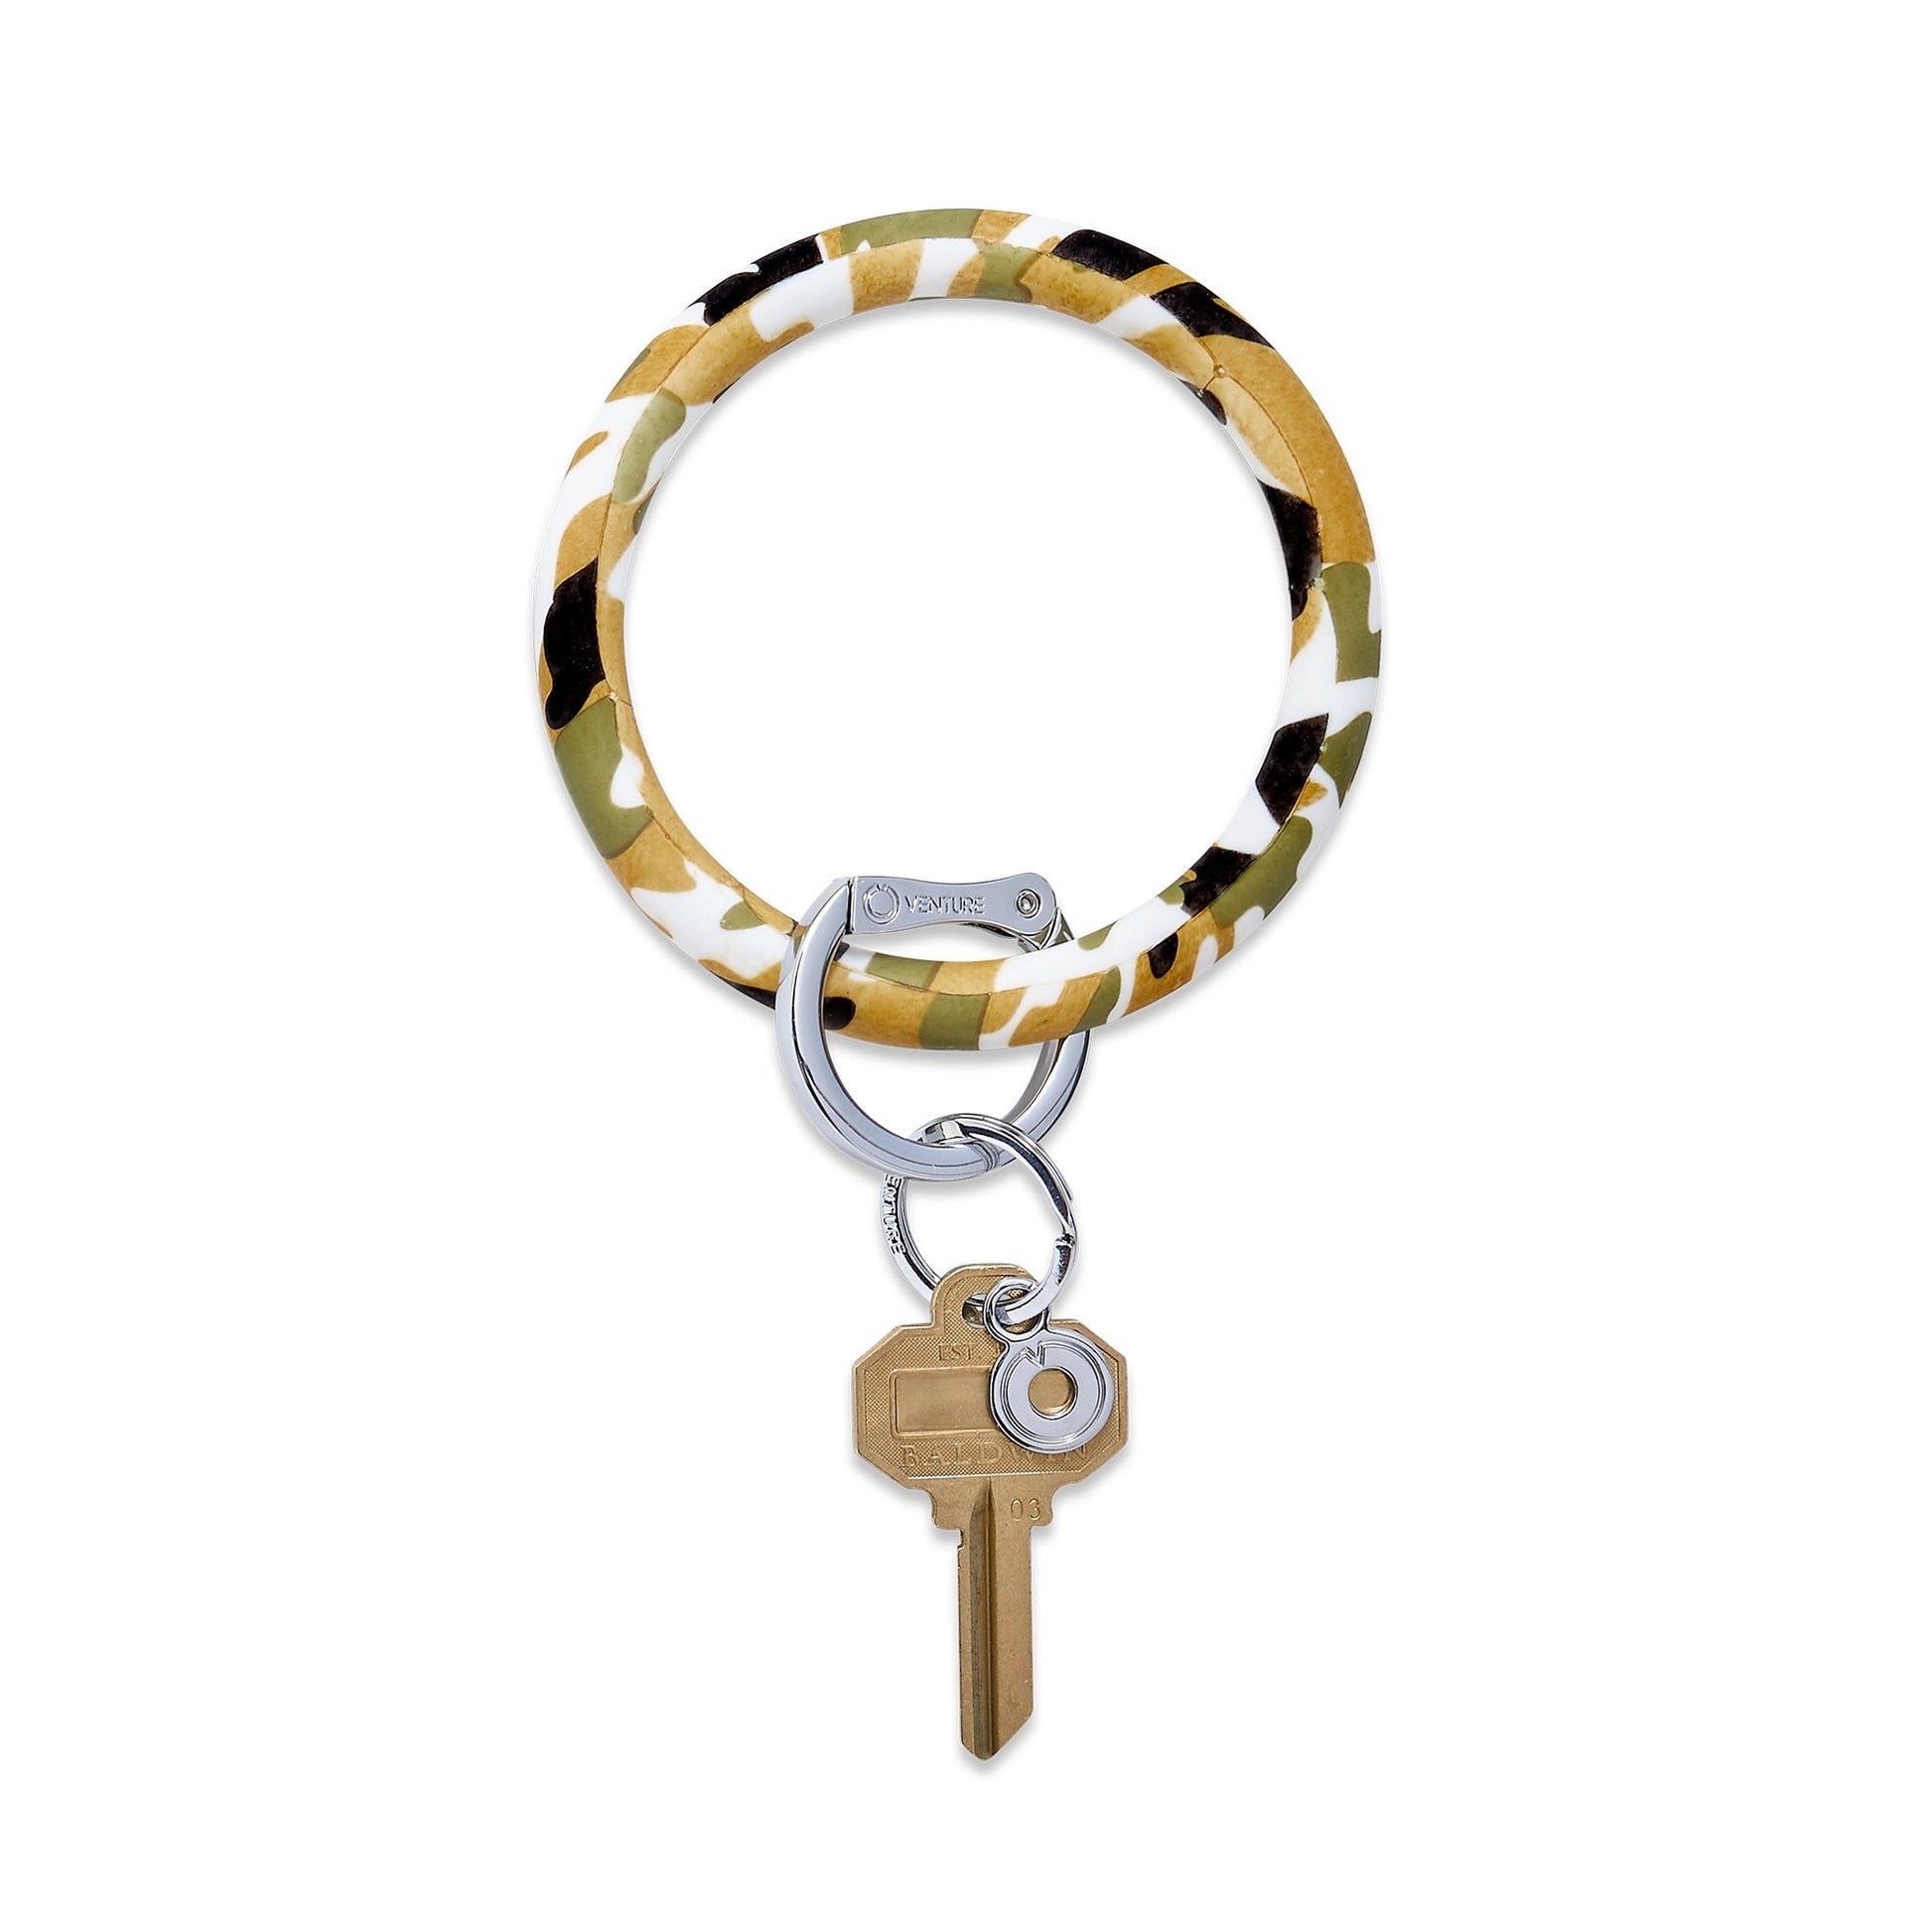 Camo - Silicone Big O Key Ring by Oventure. Shown with a gold key it shows the back side of the print